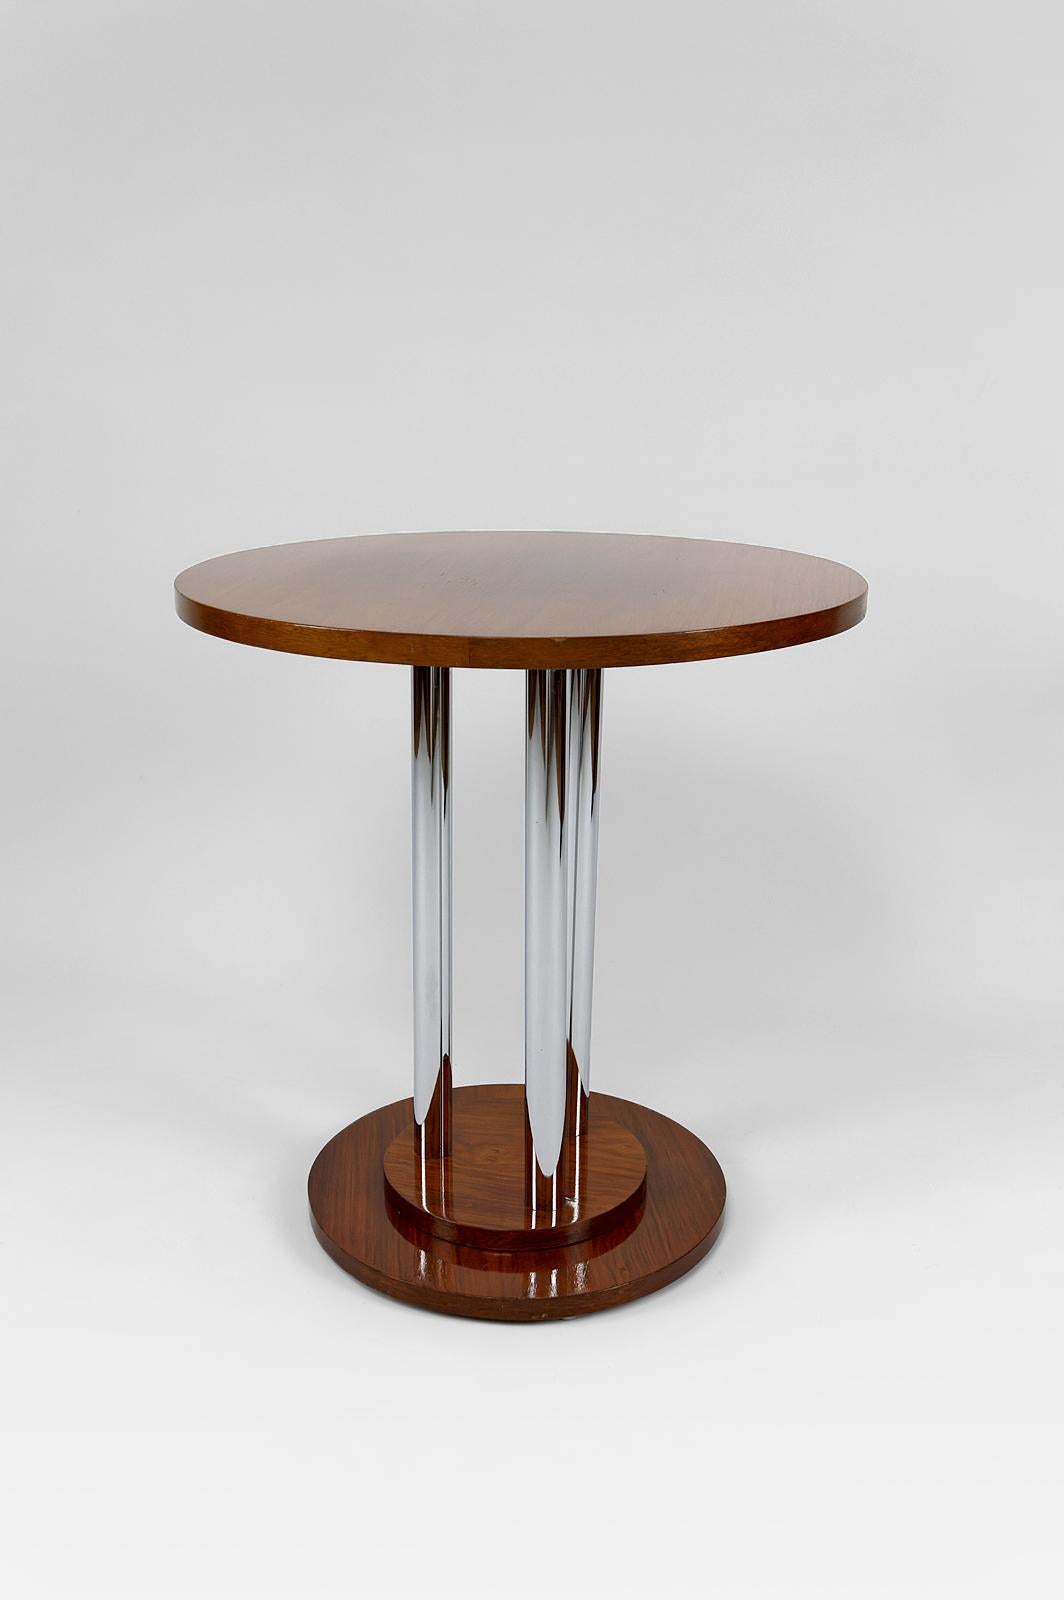 Modernist Art Deco pedestal table in walnut and chrome, France, Circa 1930 For Sale 6